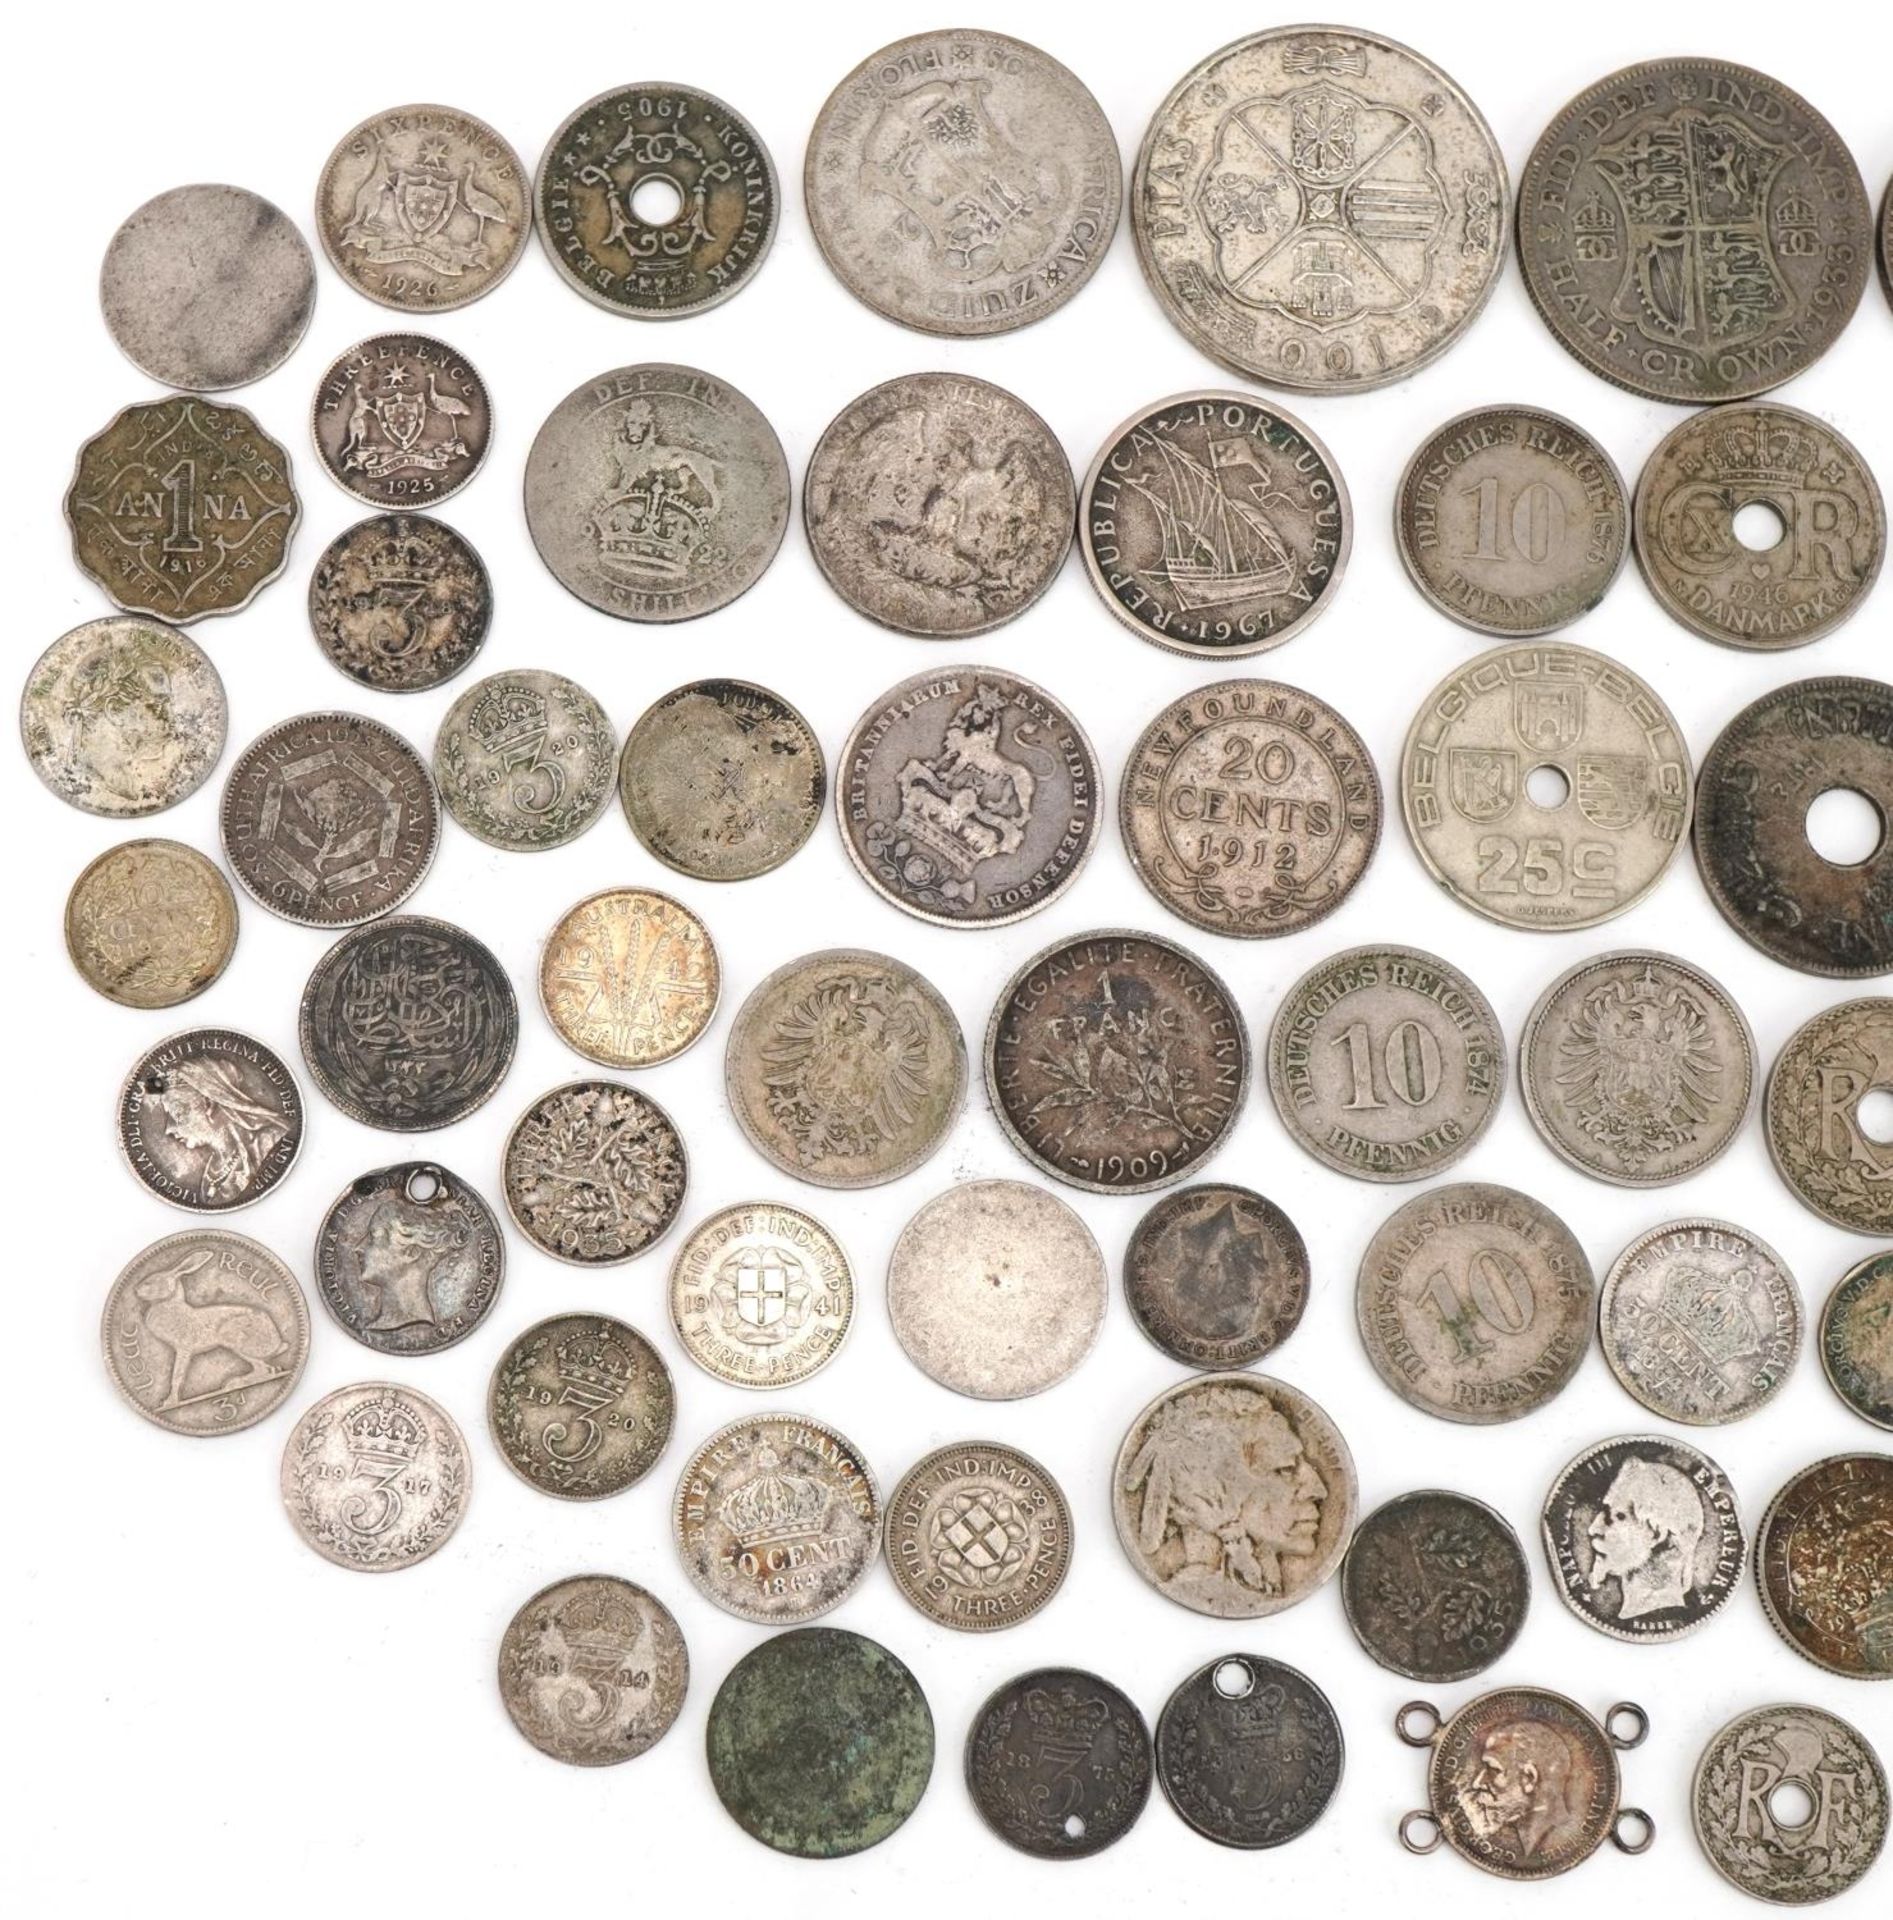 British and world coinage including one hundred ptas, half crowns and 1870 maundy twopence, 250g : - Image 2 of 6